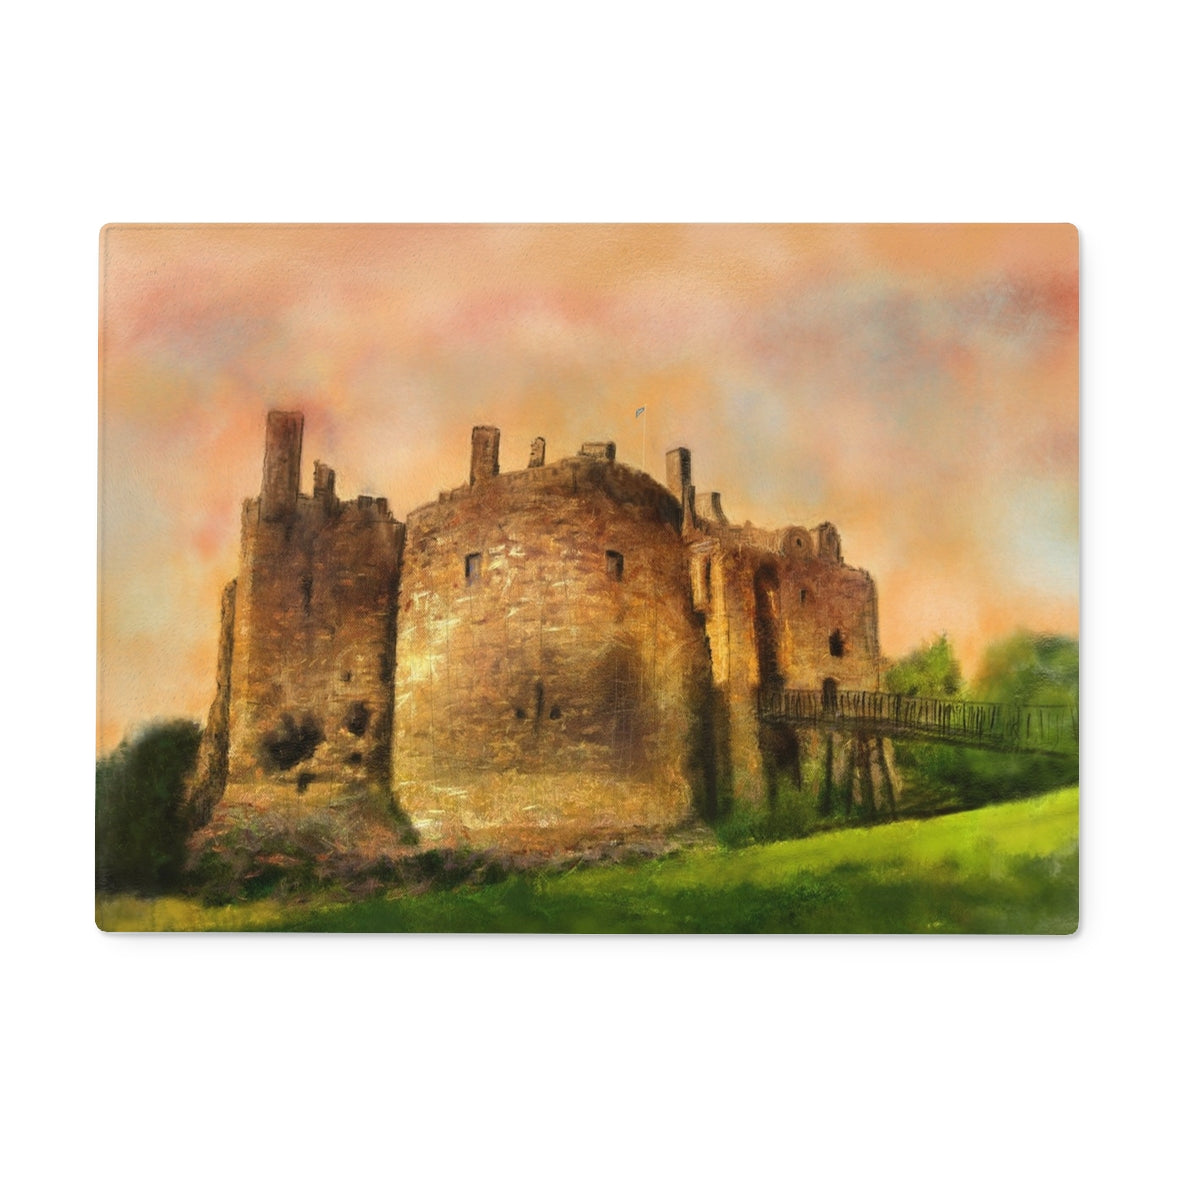 Dirleton Castle Art Gifts Glass Chopping Board-Glass Chopping Boards-Historic & Iconic Scotland Art Gallery-15"x11" Rectangular-Paintings, Prints, Homeware, Art Gifts From Scotland By Scottish Artist Kevin Hunter